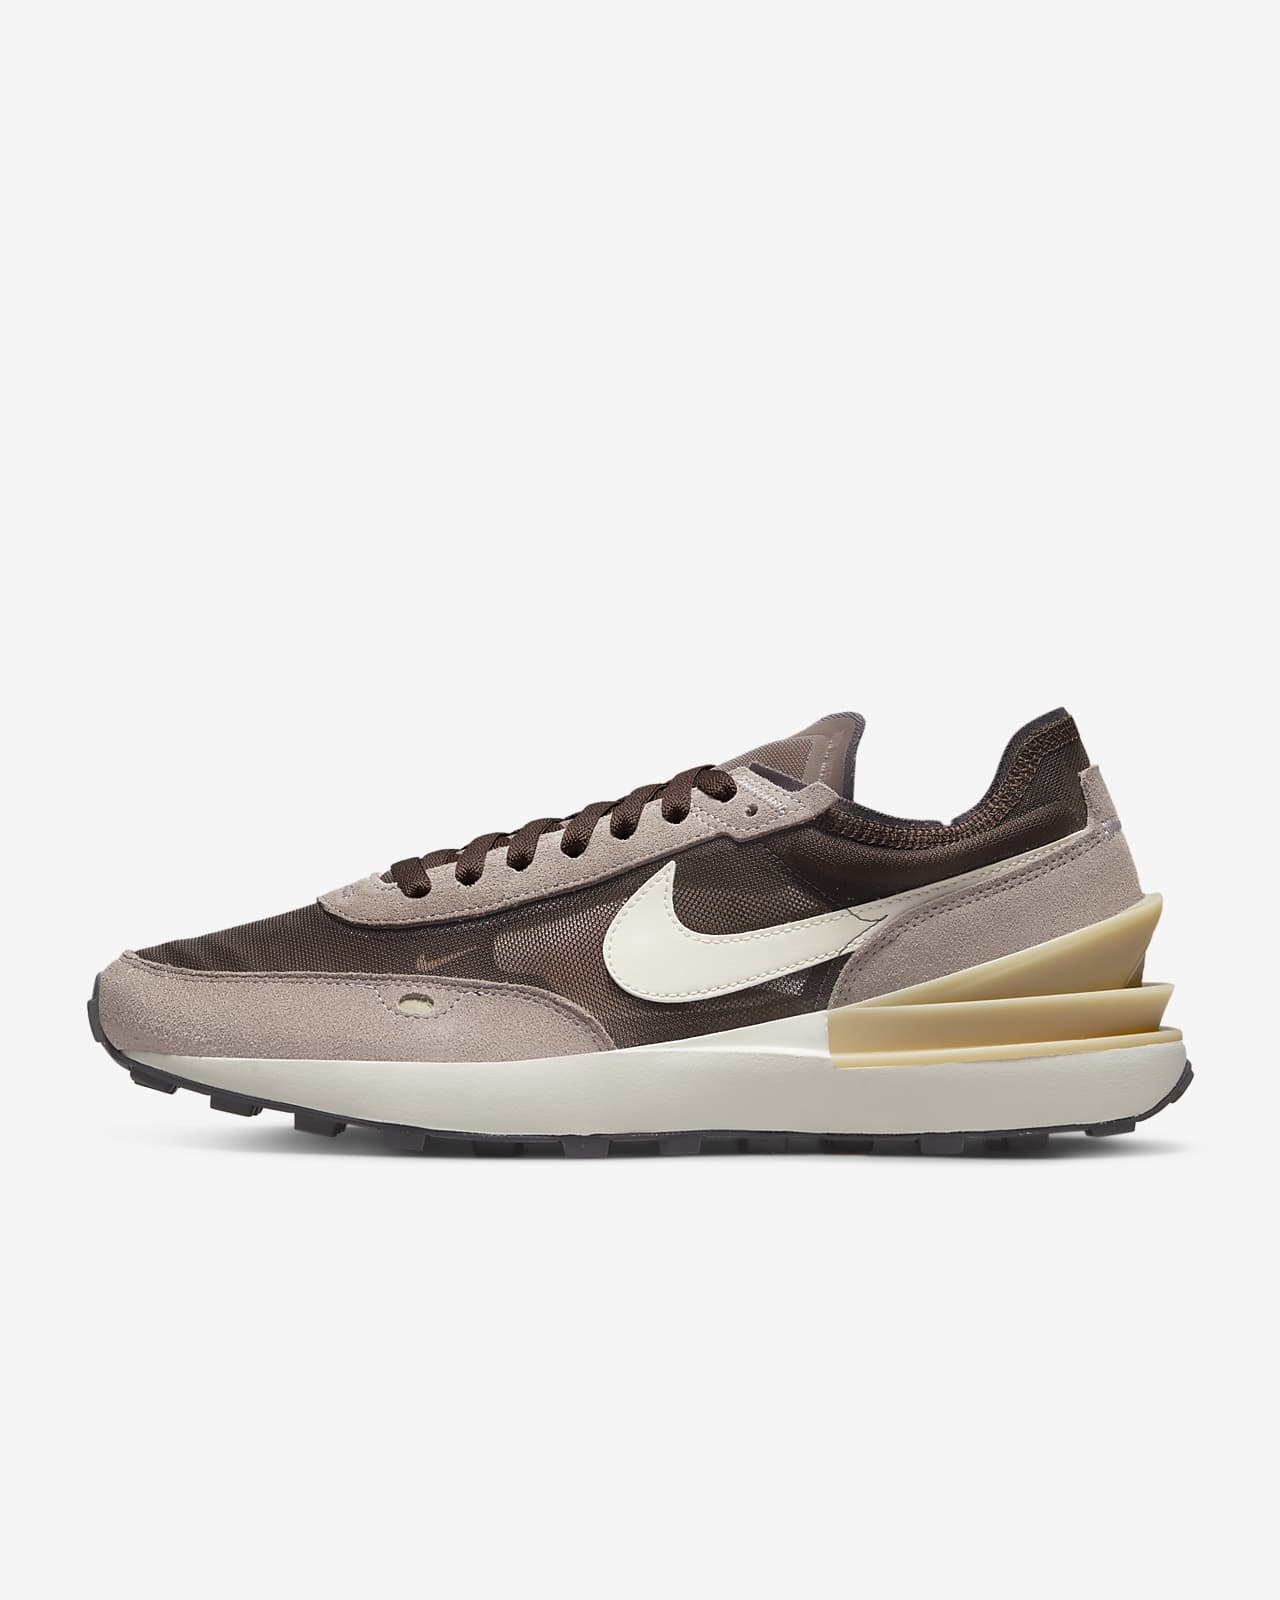 Chaussure Nike Waffle One pour Homme